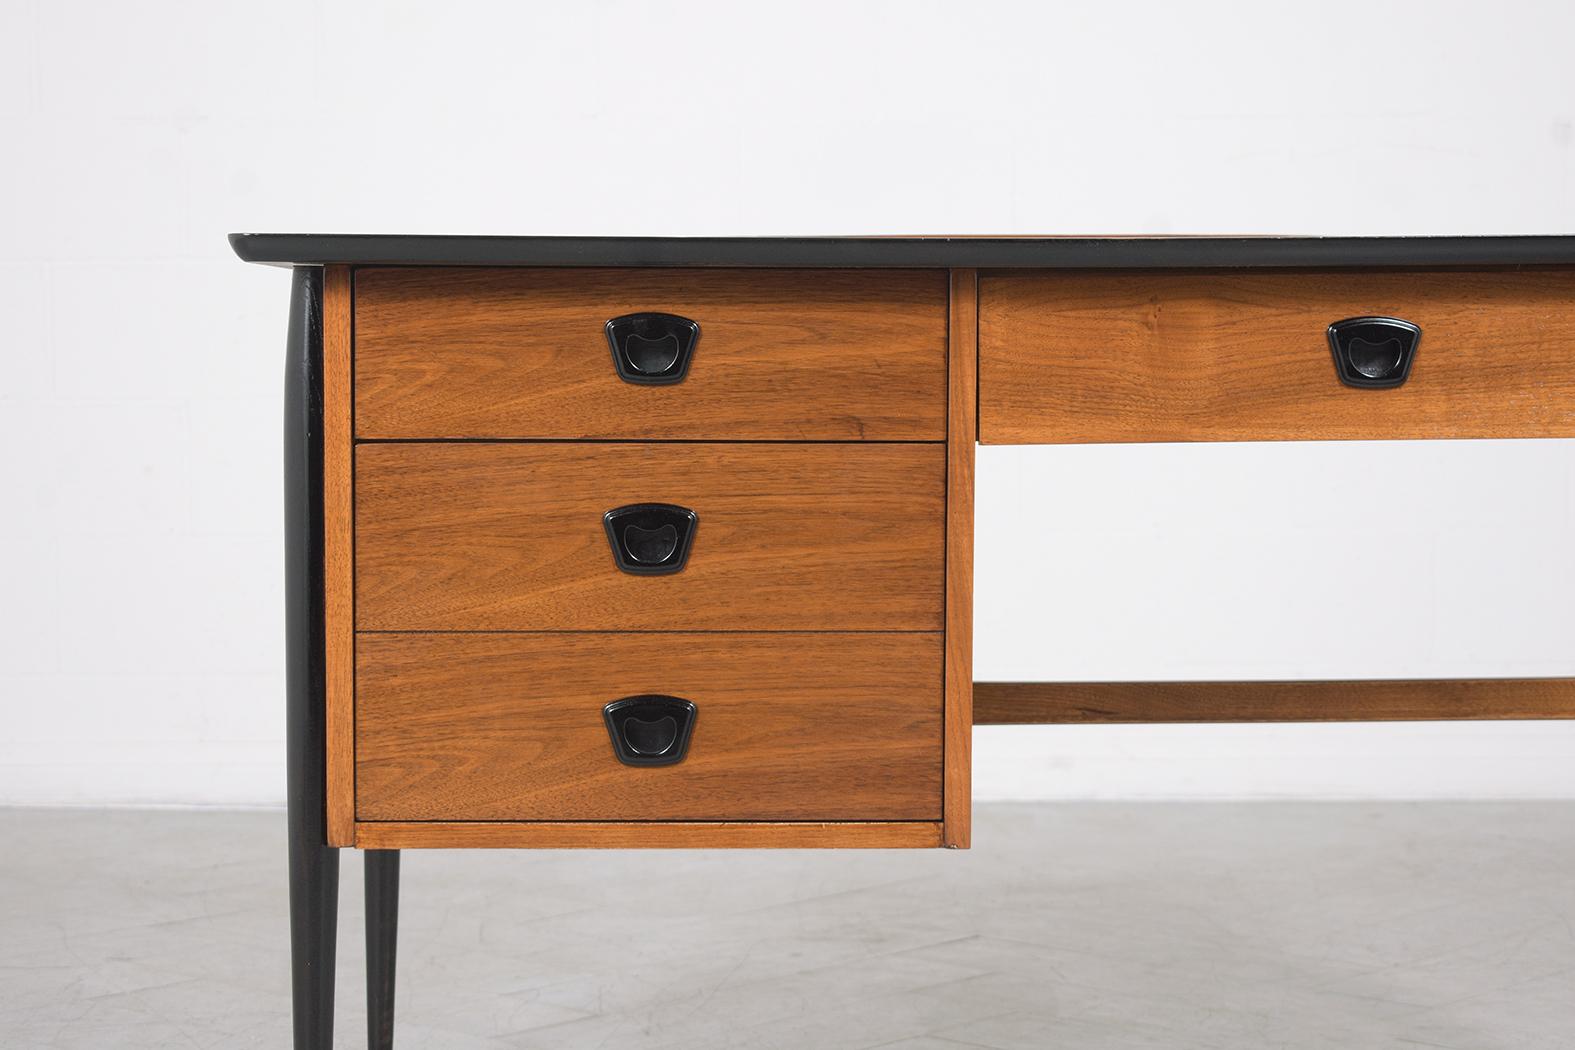 American Mid-Century Modern Lacquered Desk